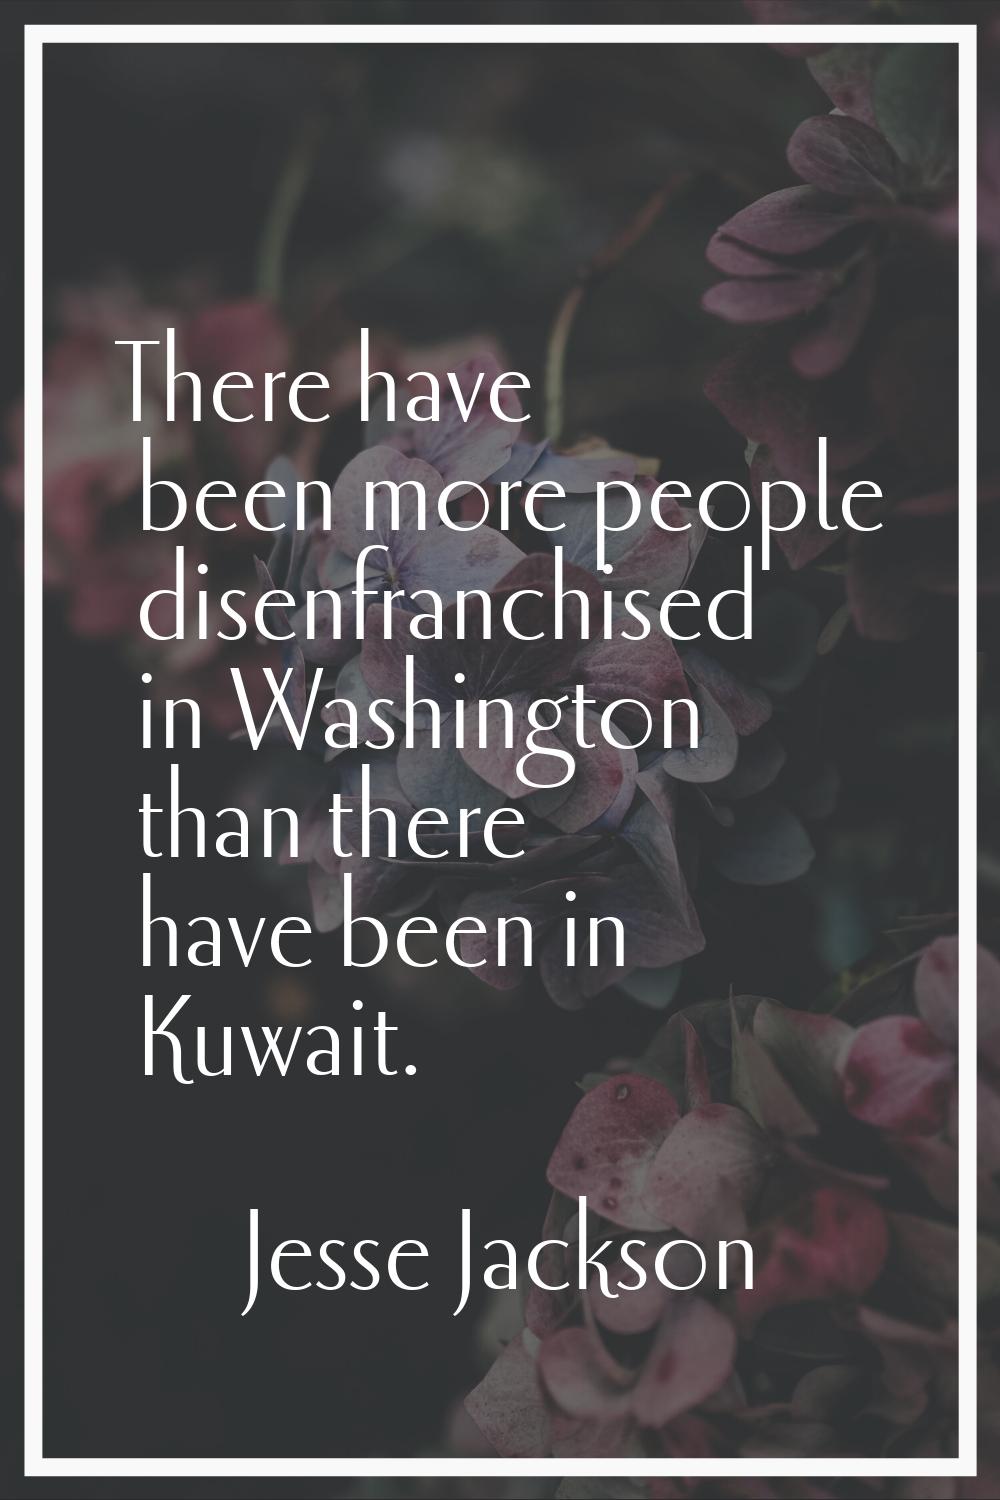 There have been more people disenfranchised in Washington than there have been in Kuwait.